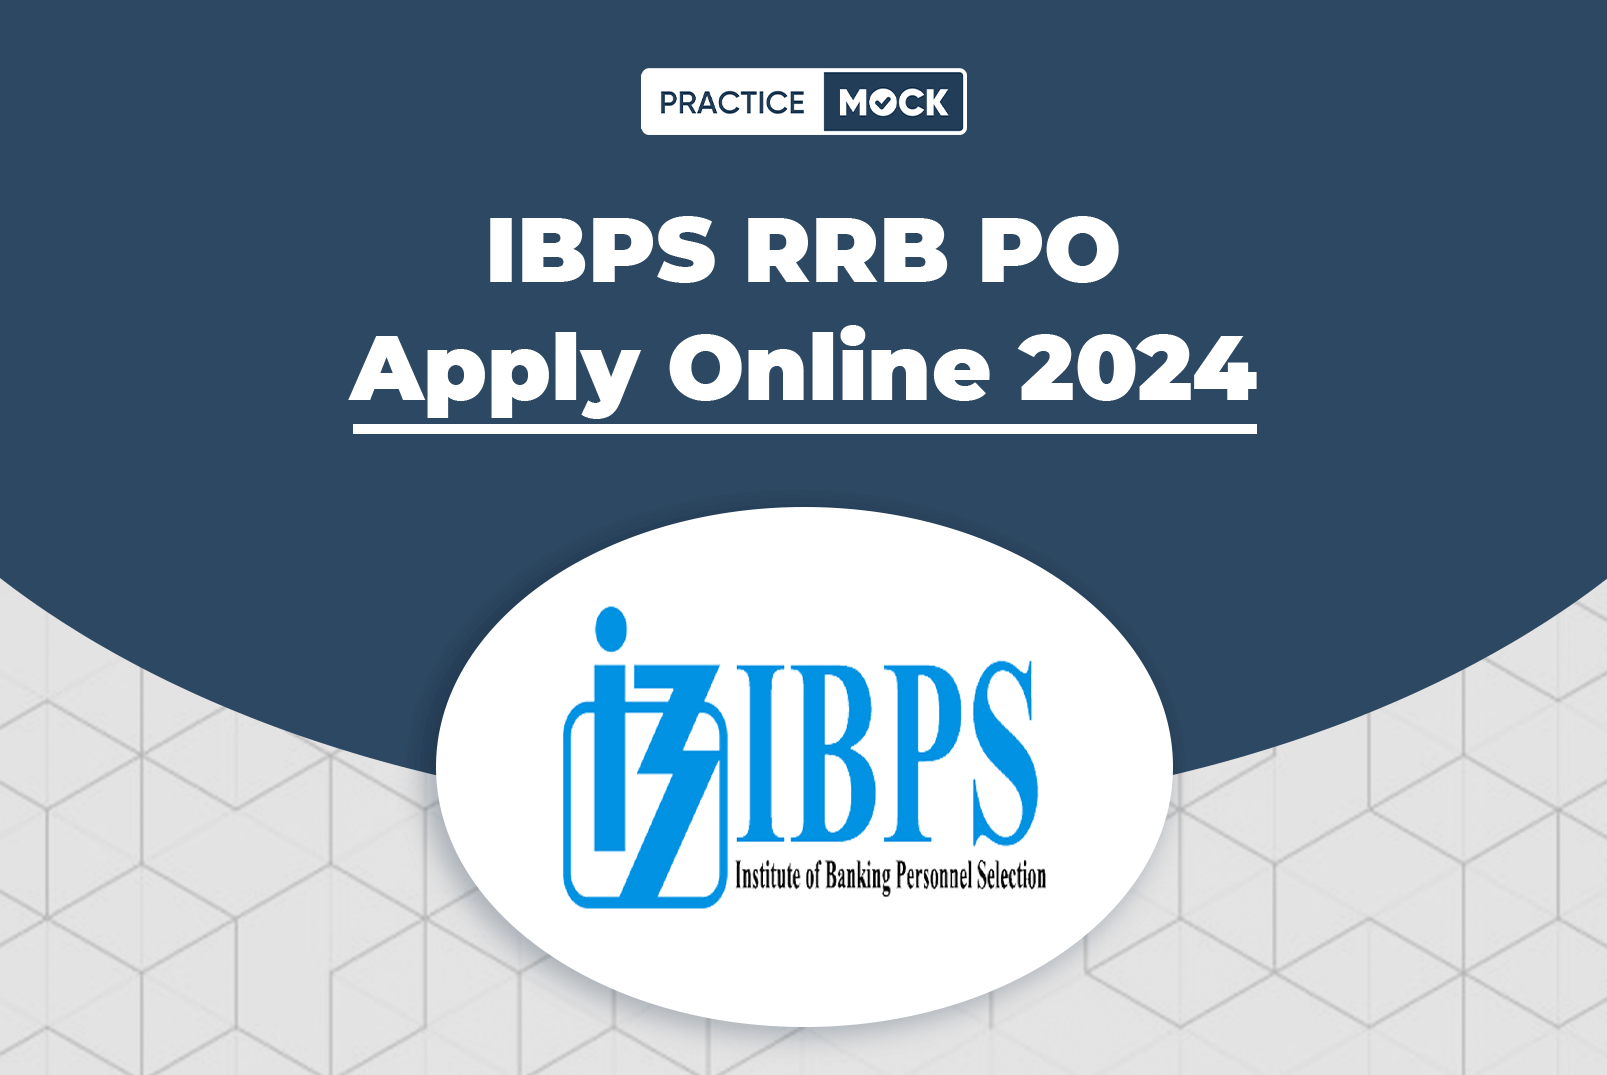 IBPS RRB PO Apply Online 2024